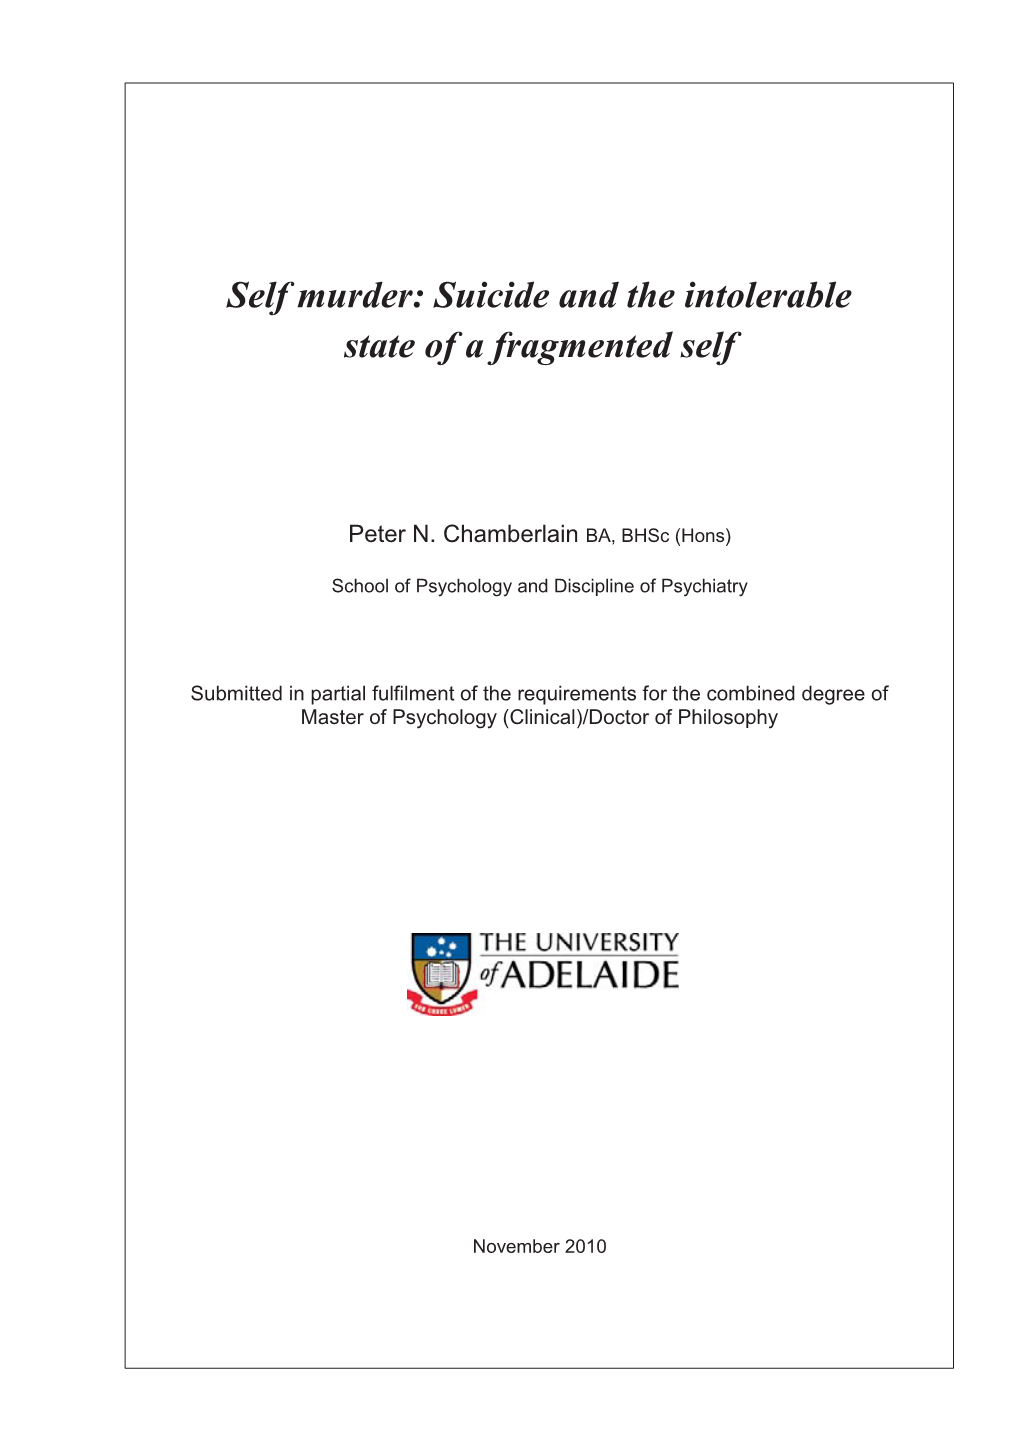 Suicide and the Intolerable State of a Fragmented Self